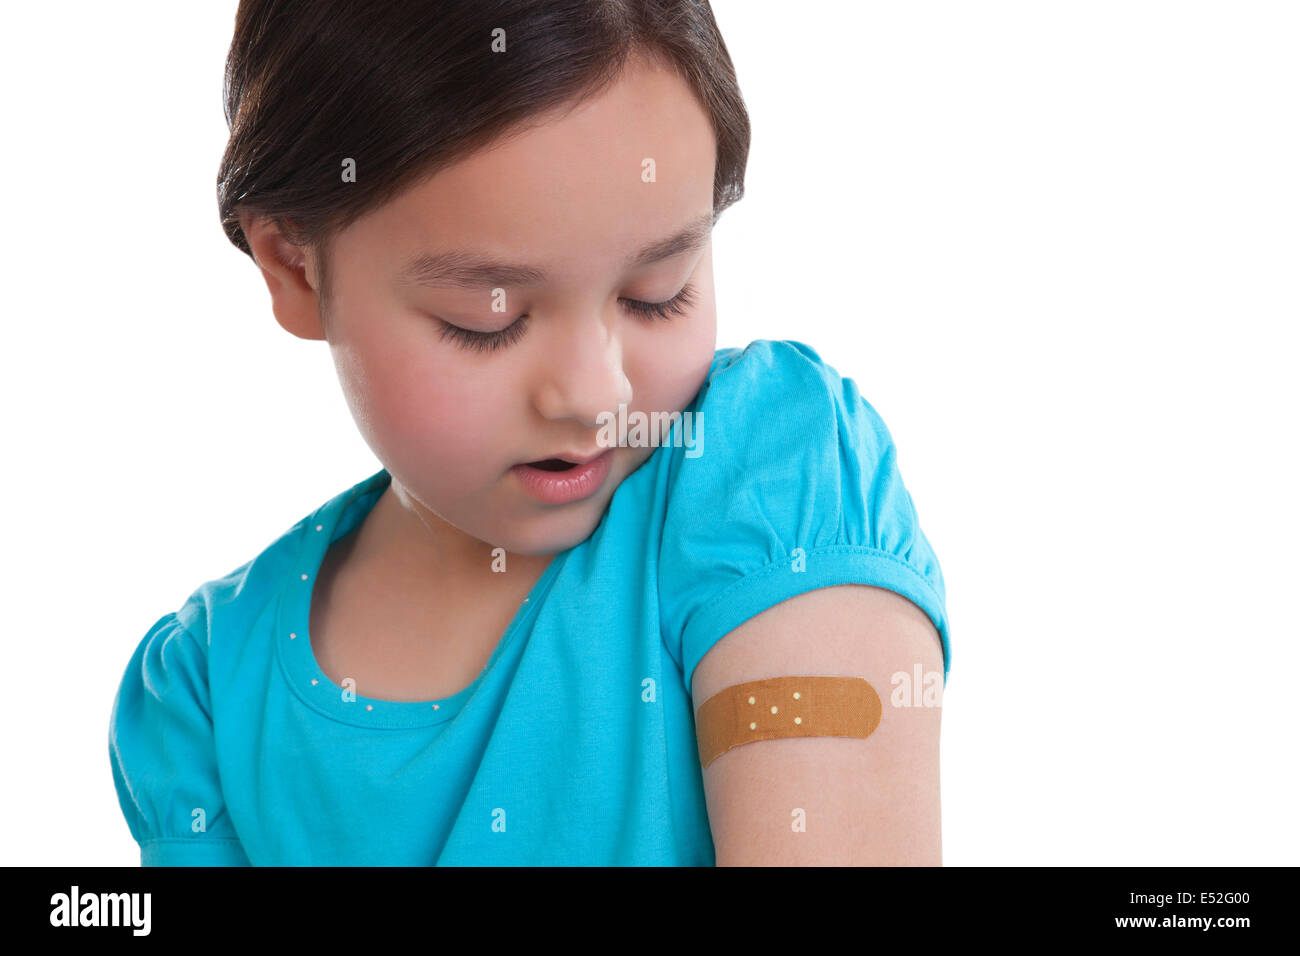 Little girl with band-aid on arm Stock Photo